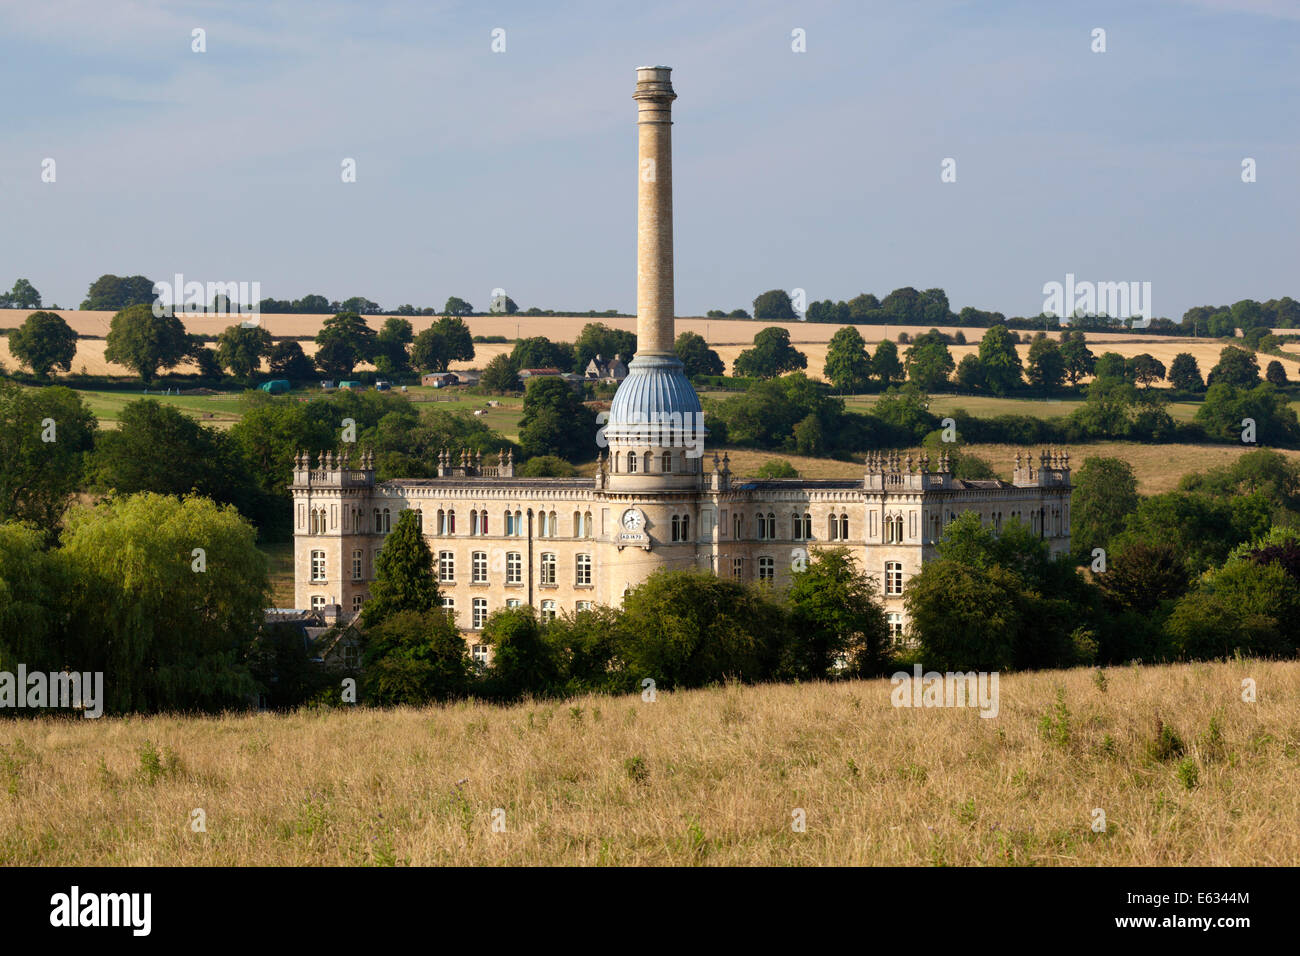 Bliss Mill, Chipping Norton, Cotswolds, Oxfordshire, United Kingdom,  Europe Stock Photo